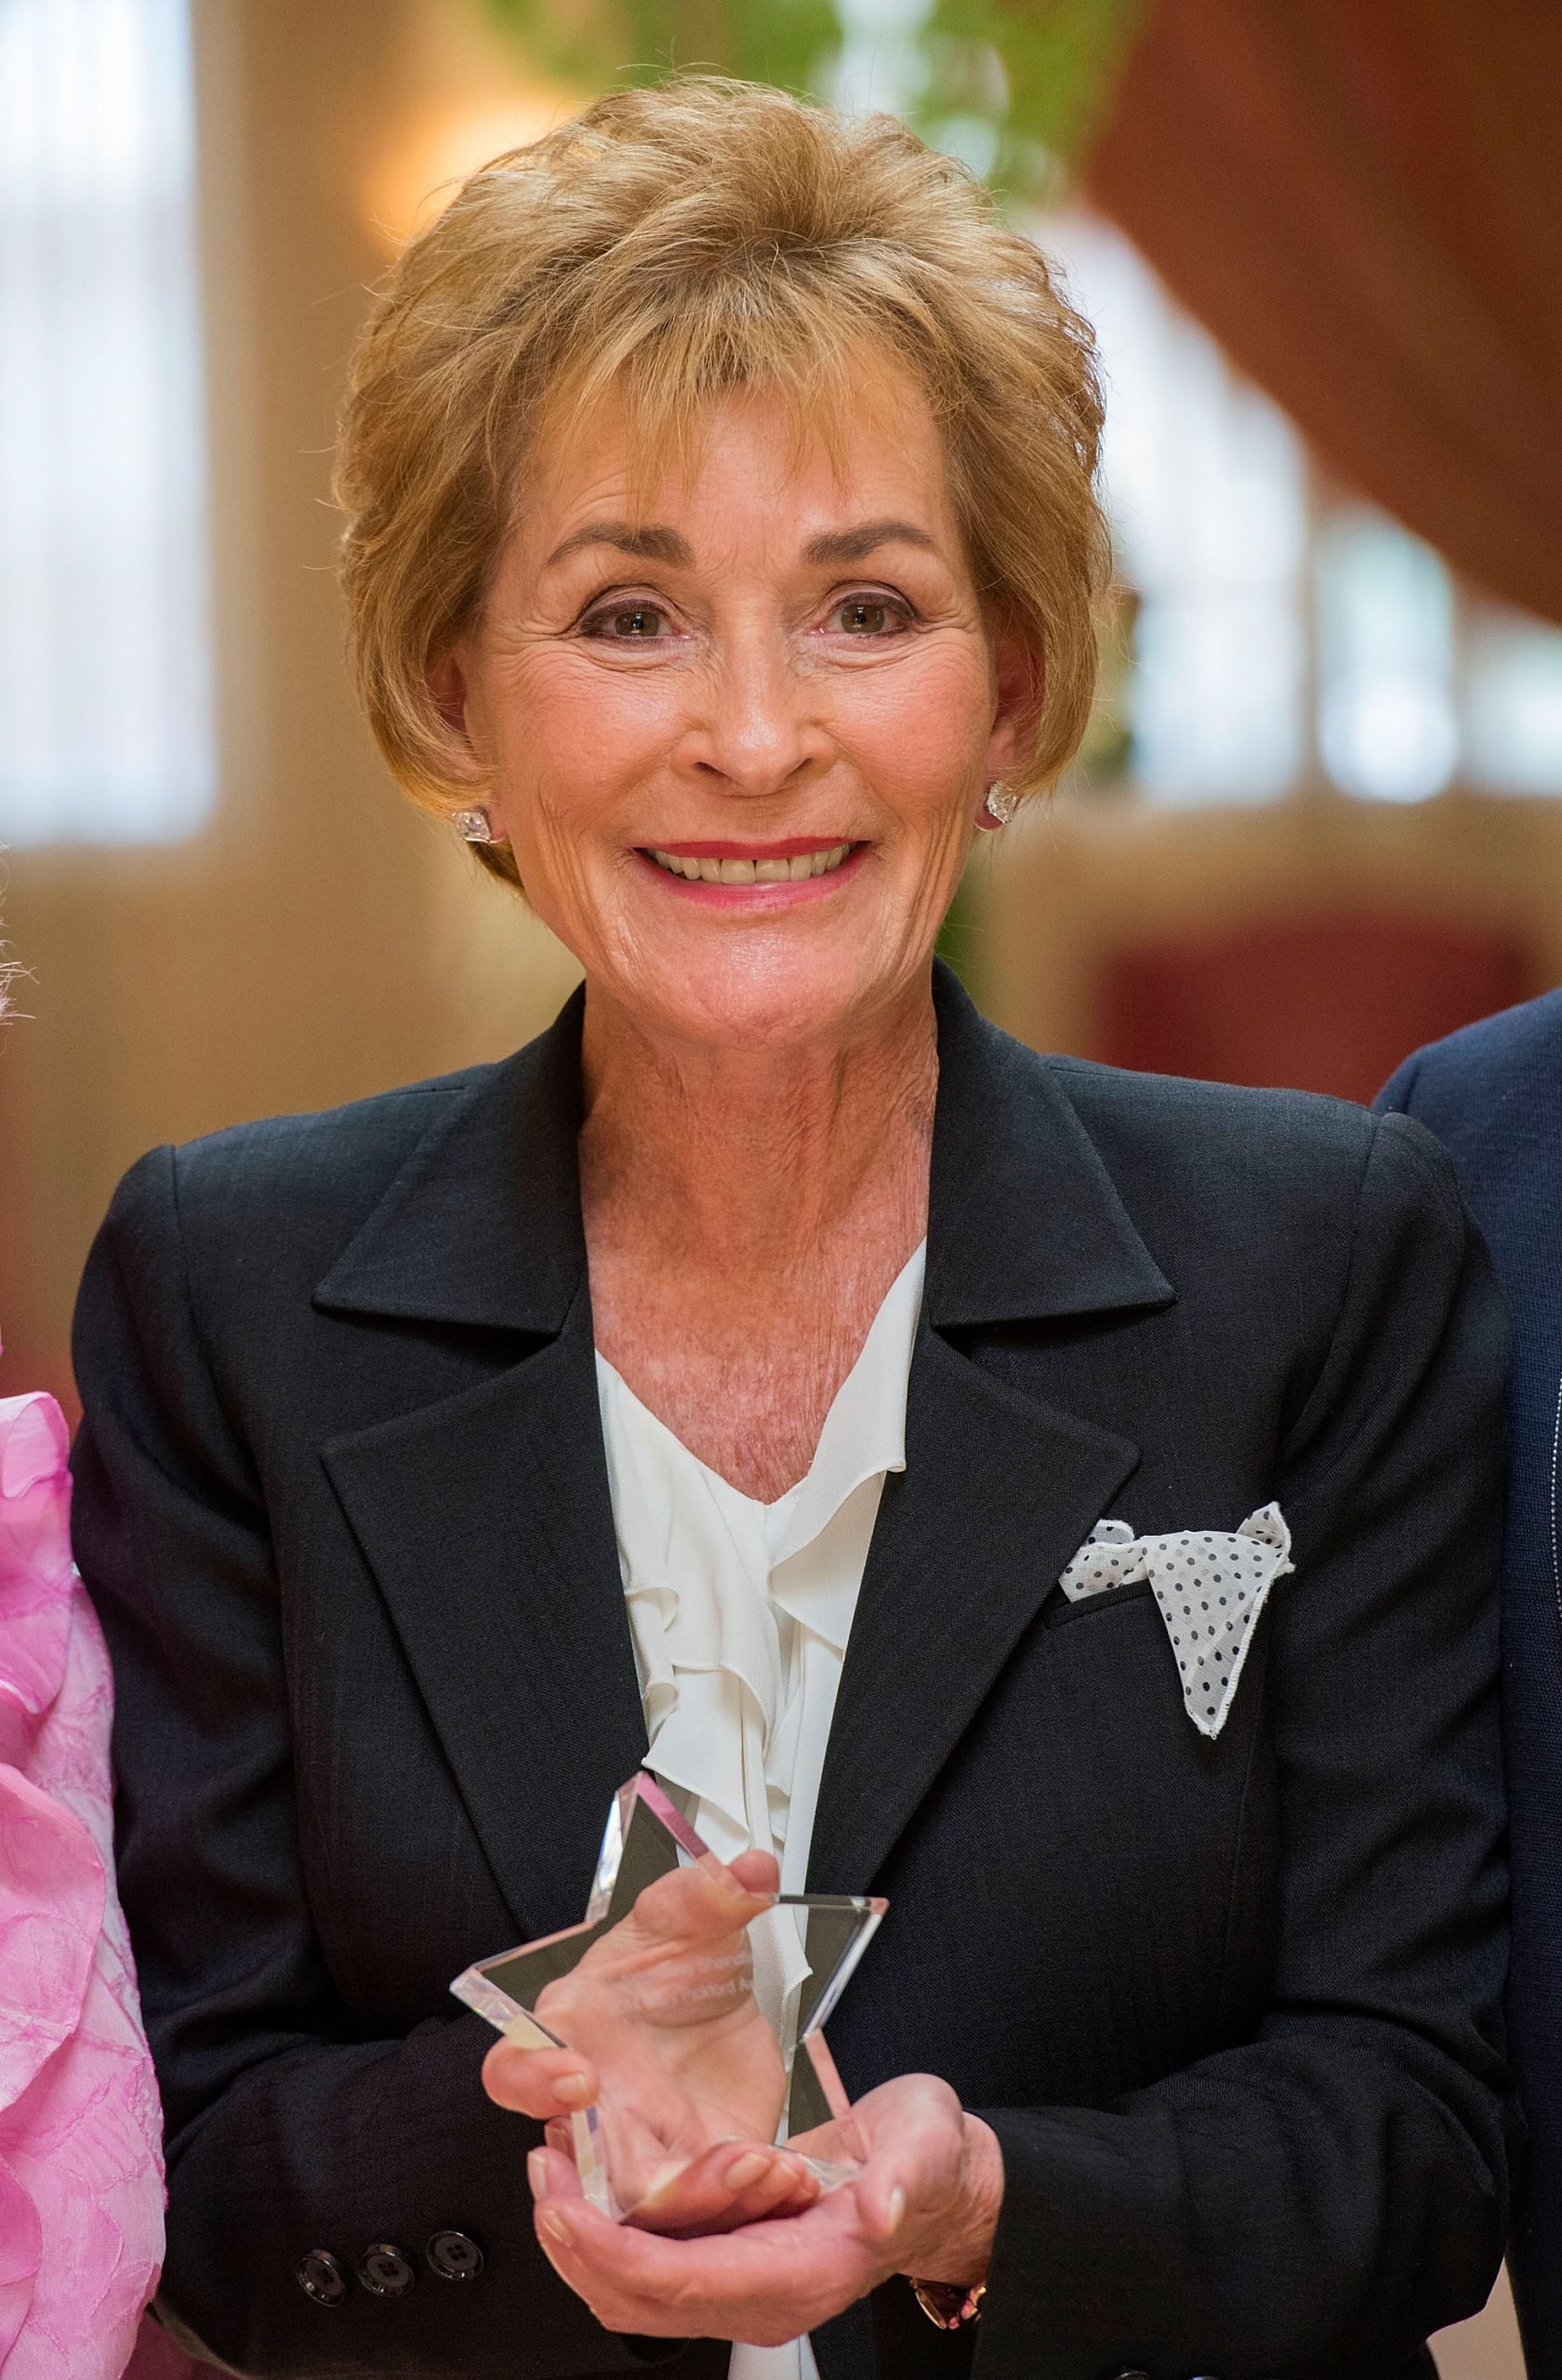 Judge Judy Justice Judith Sheindlin On Her Typical Work Day And The Impact Her Show Has Had